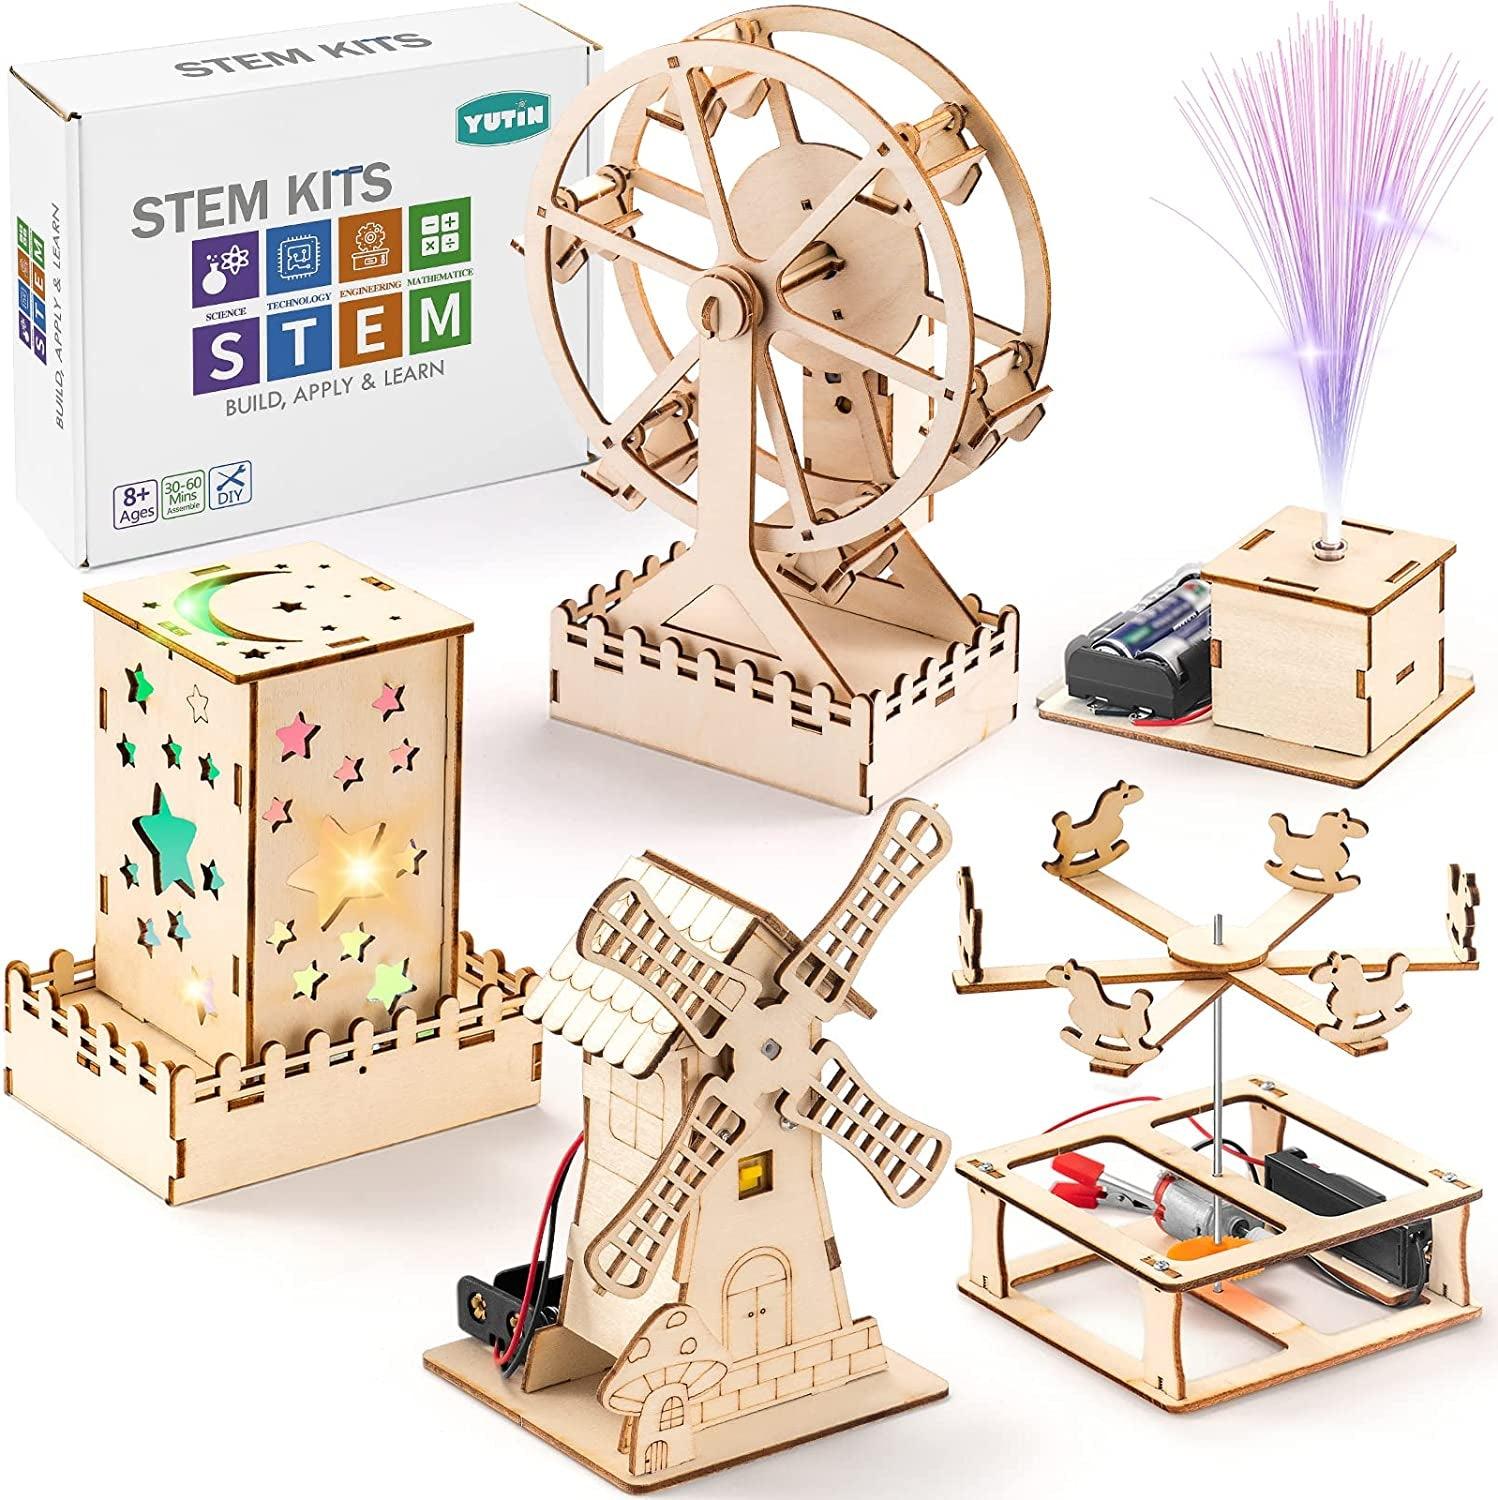 5 in 1 STEM Kits for Kids，Wood Craft Kit for for Boys Ages 8-12